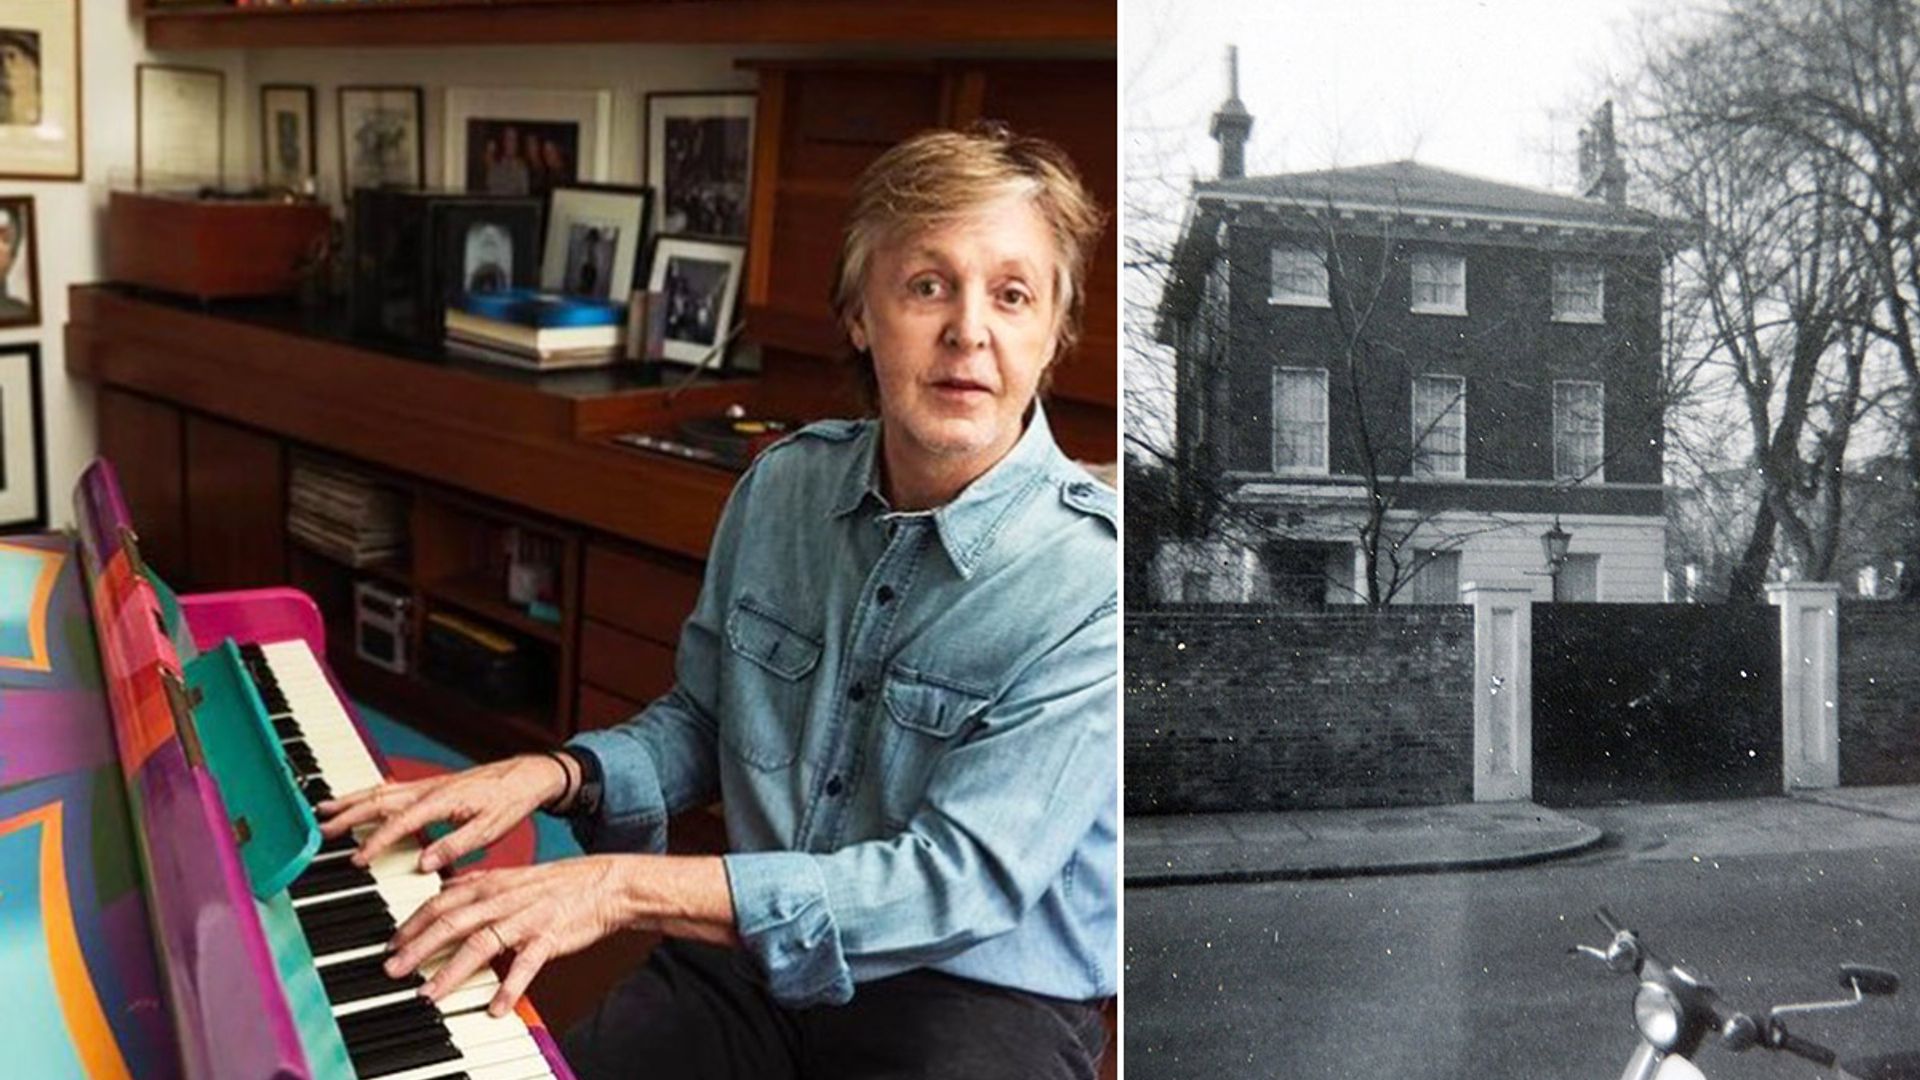 Paul McCartney's epic £16.5million+ home is a tribute to The Beatles